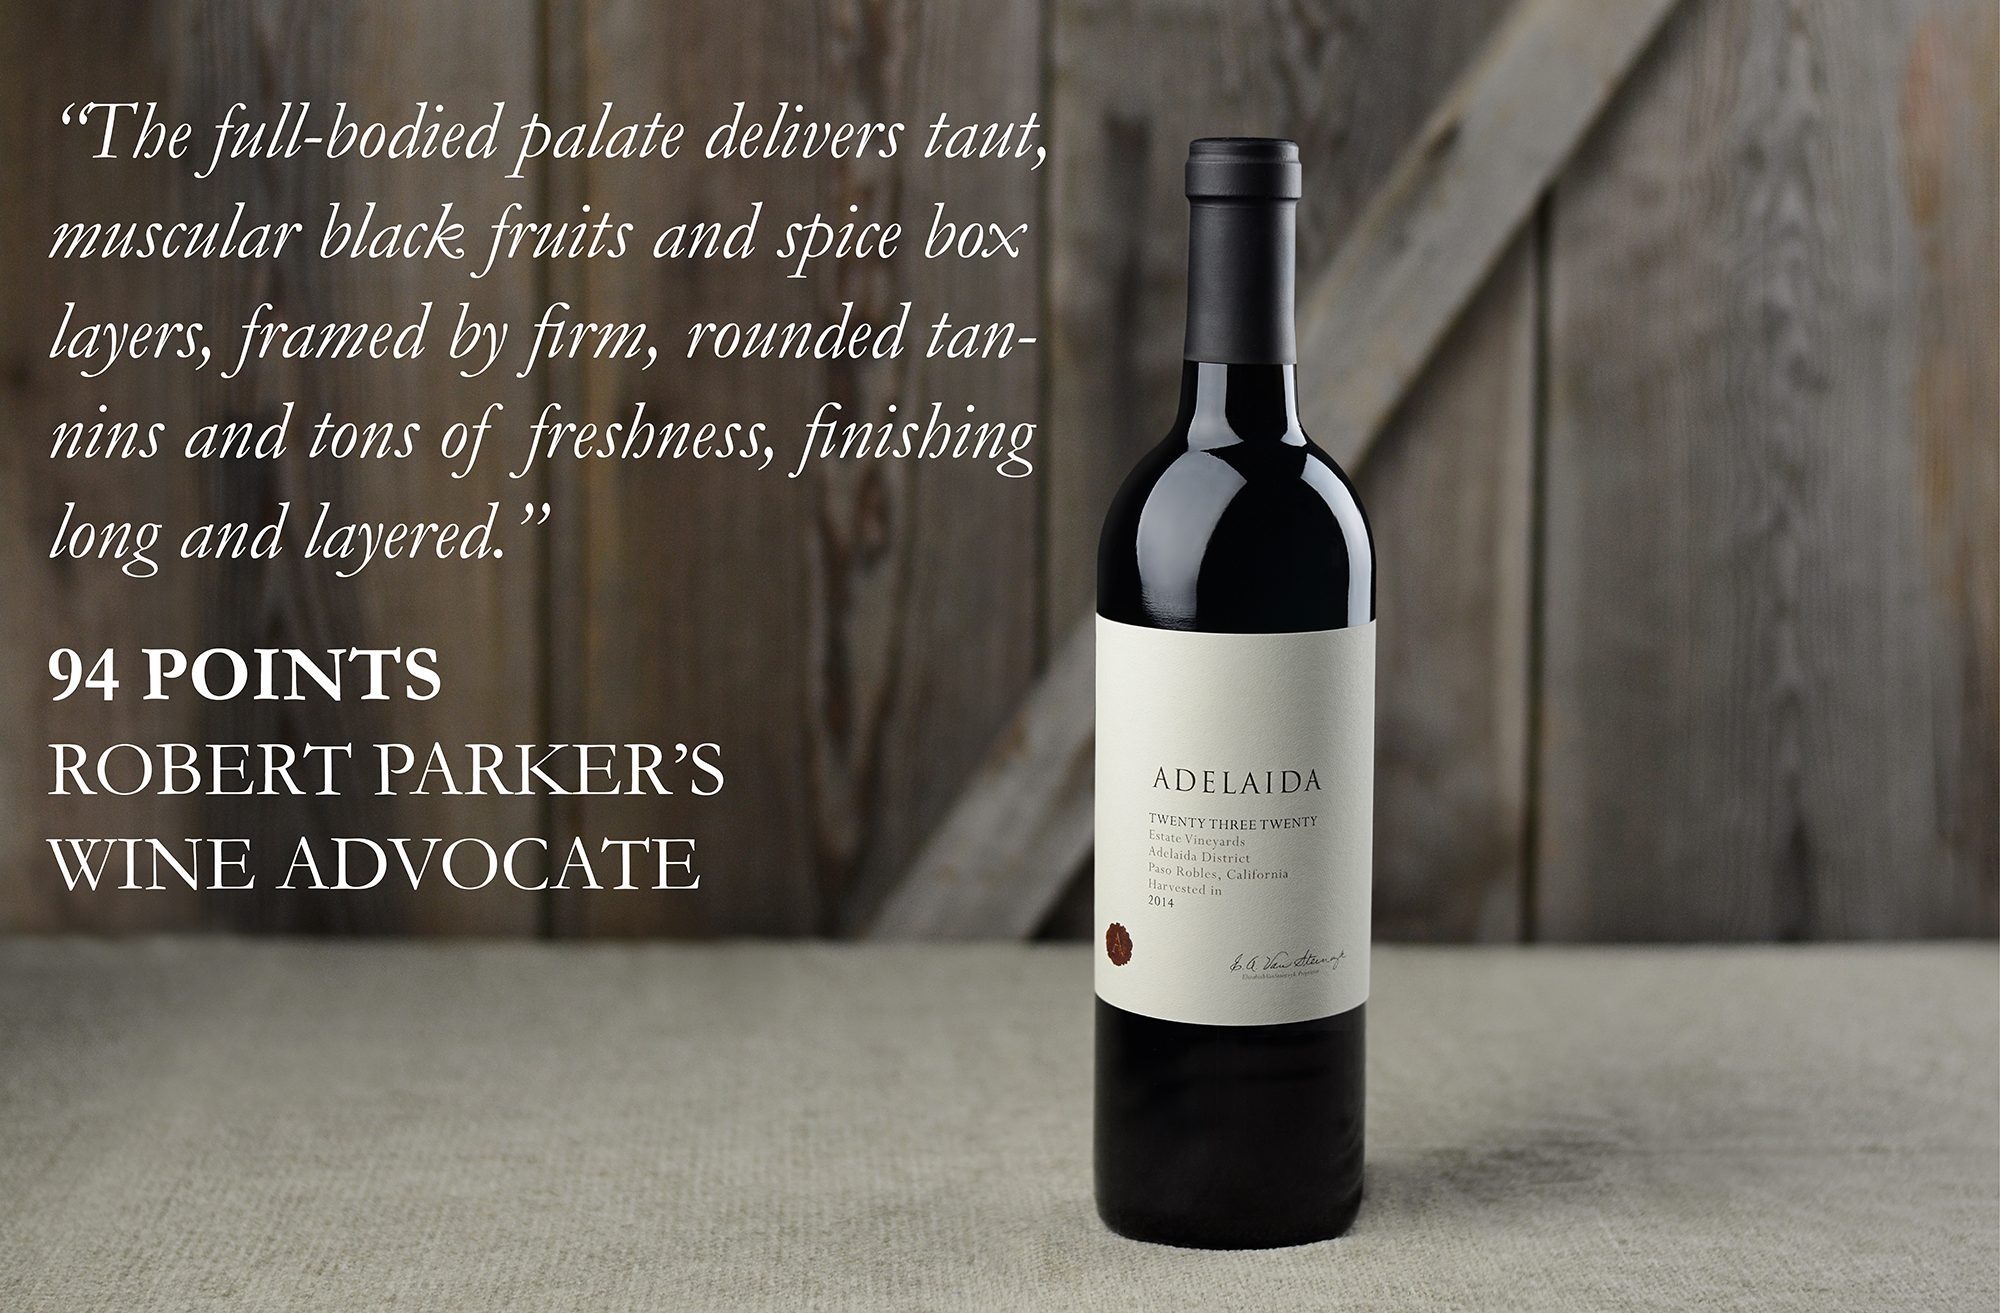 Bottle of Twenty Three Twenty on a table with a wood background. Text says: “The full-bodied palate delivers taut, muscular black fruits and spice box layers, framed by firm, rounded tannins and tons of freshness, finishing long and layered. 94 points Robert Parker’s Wine Advocate 